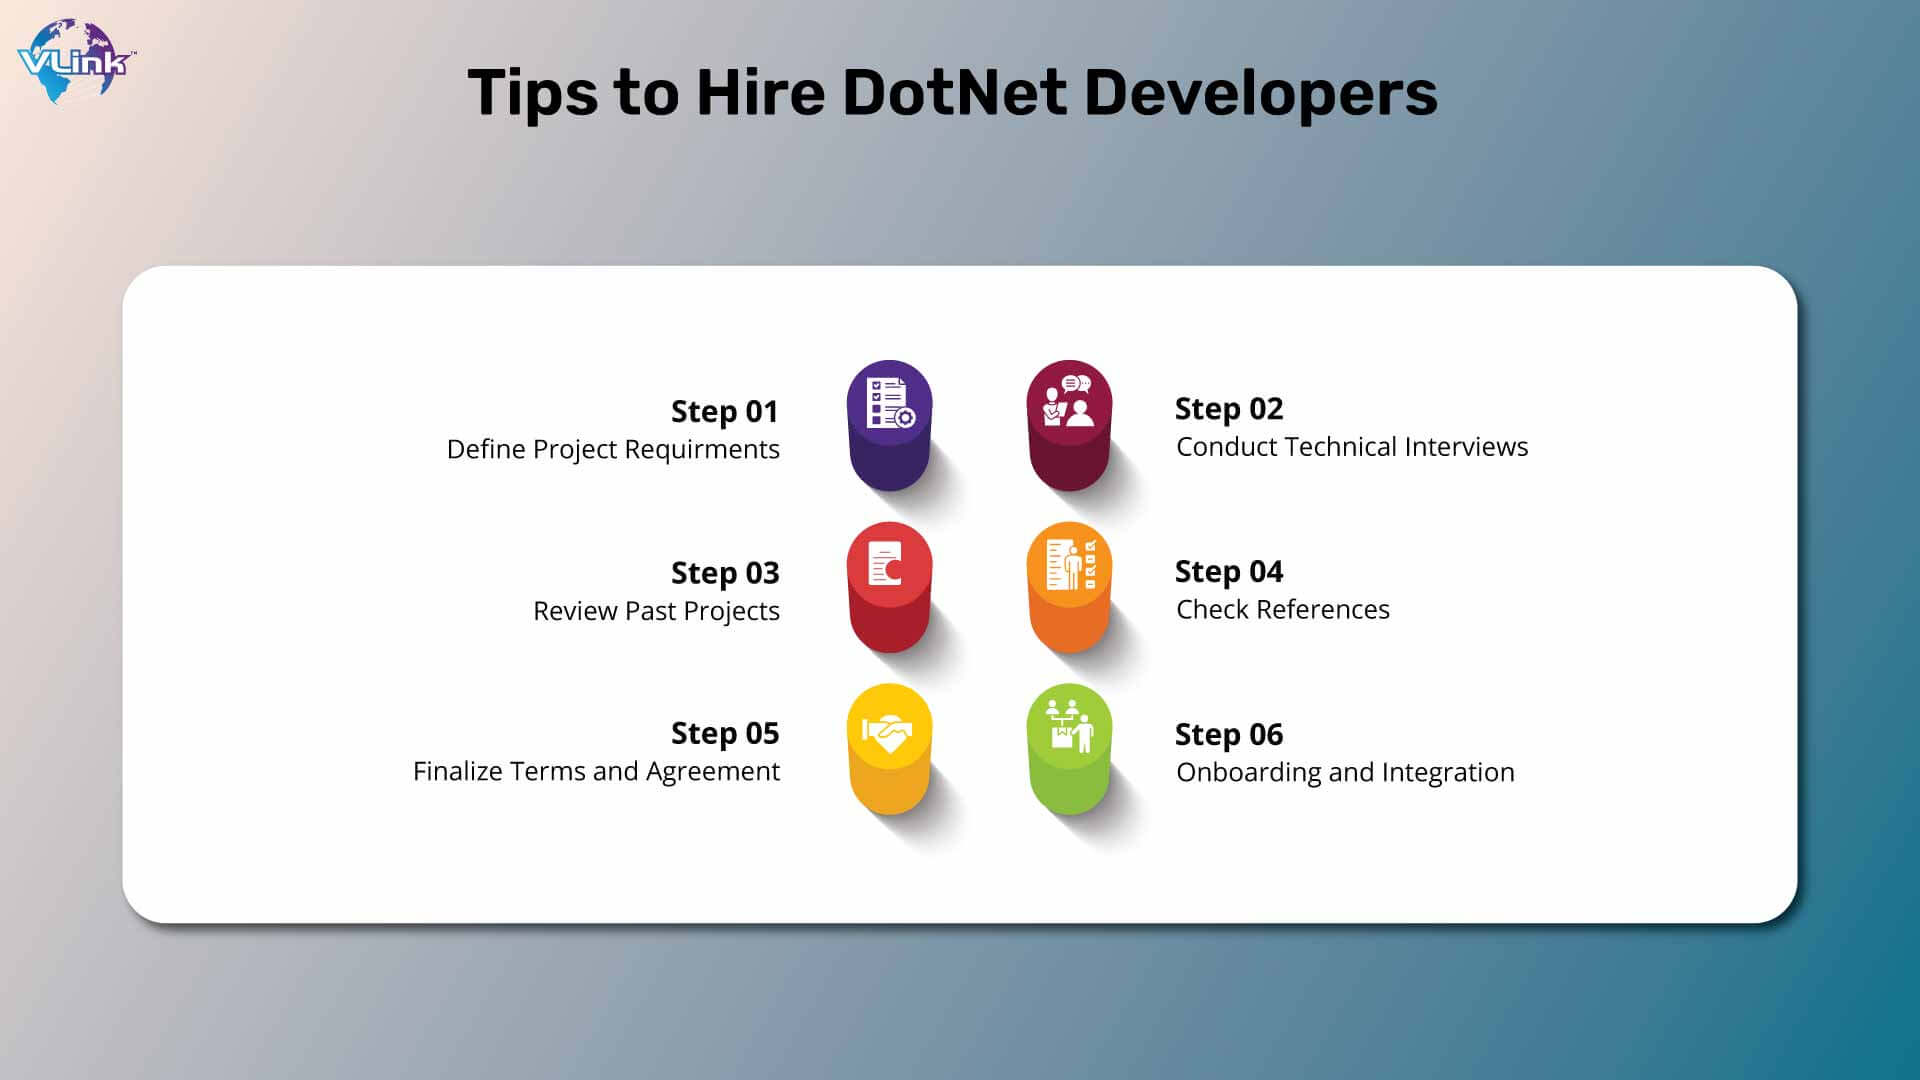 Tips to Hire Remote DotNet Developers